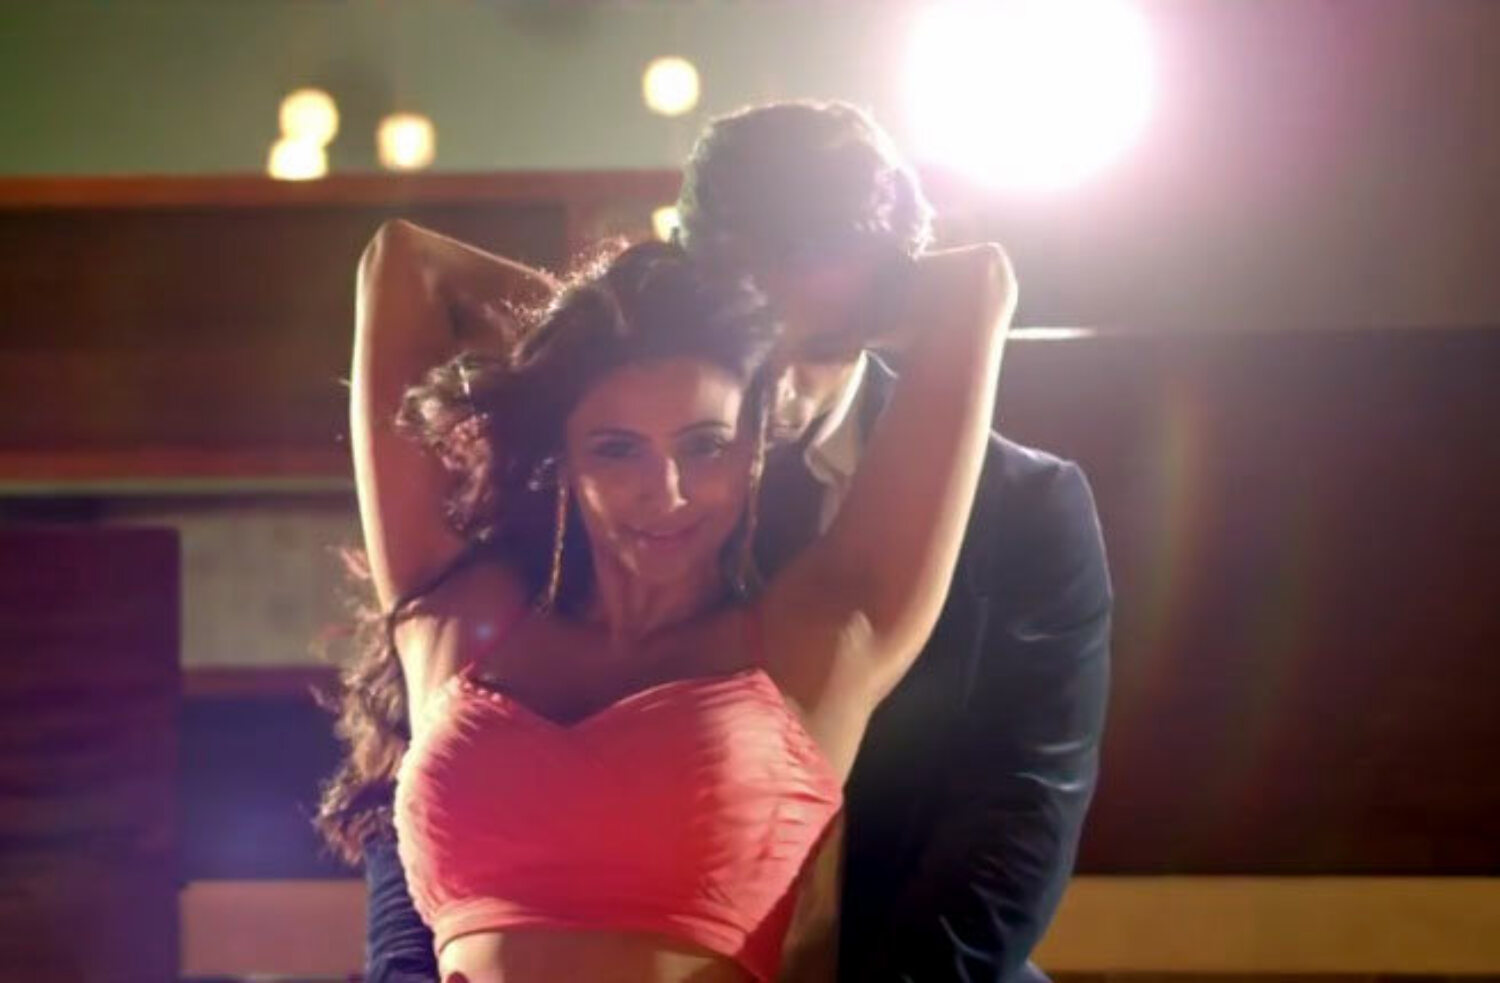 Daisy Shah Movie Hate Story 3 Song Tu Ishq Mera Still Hate Story 3 On Rediff Pages